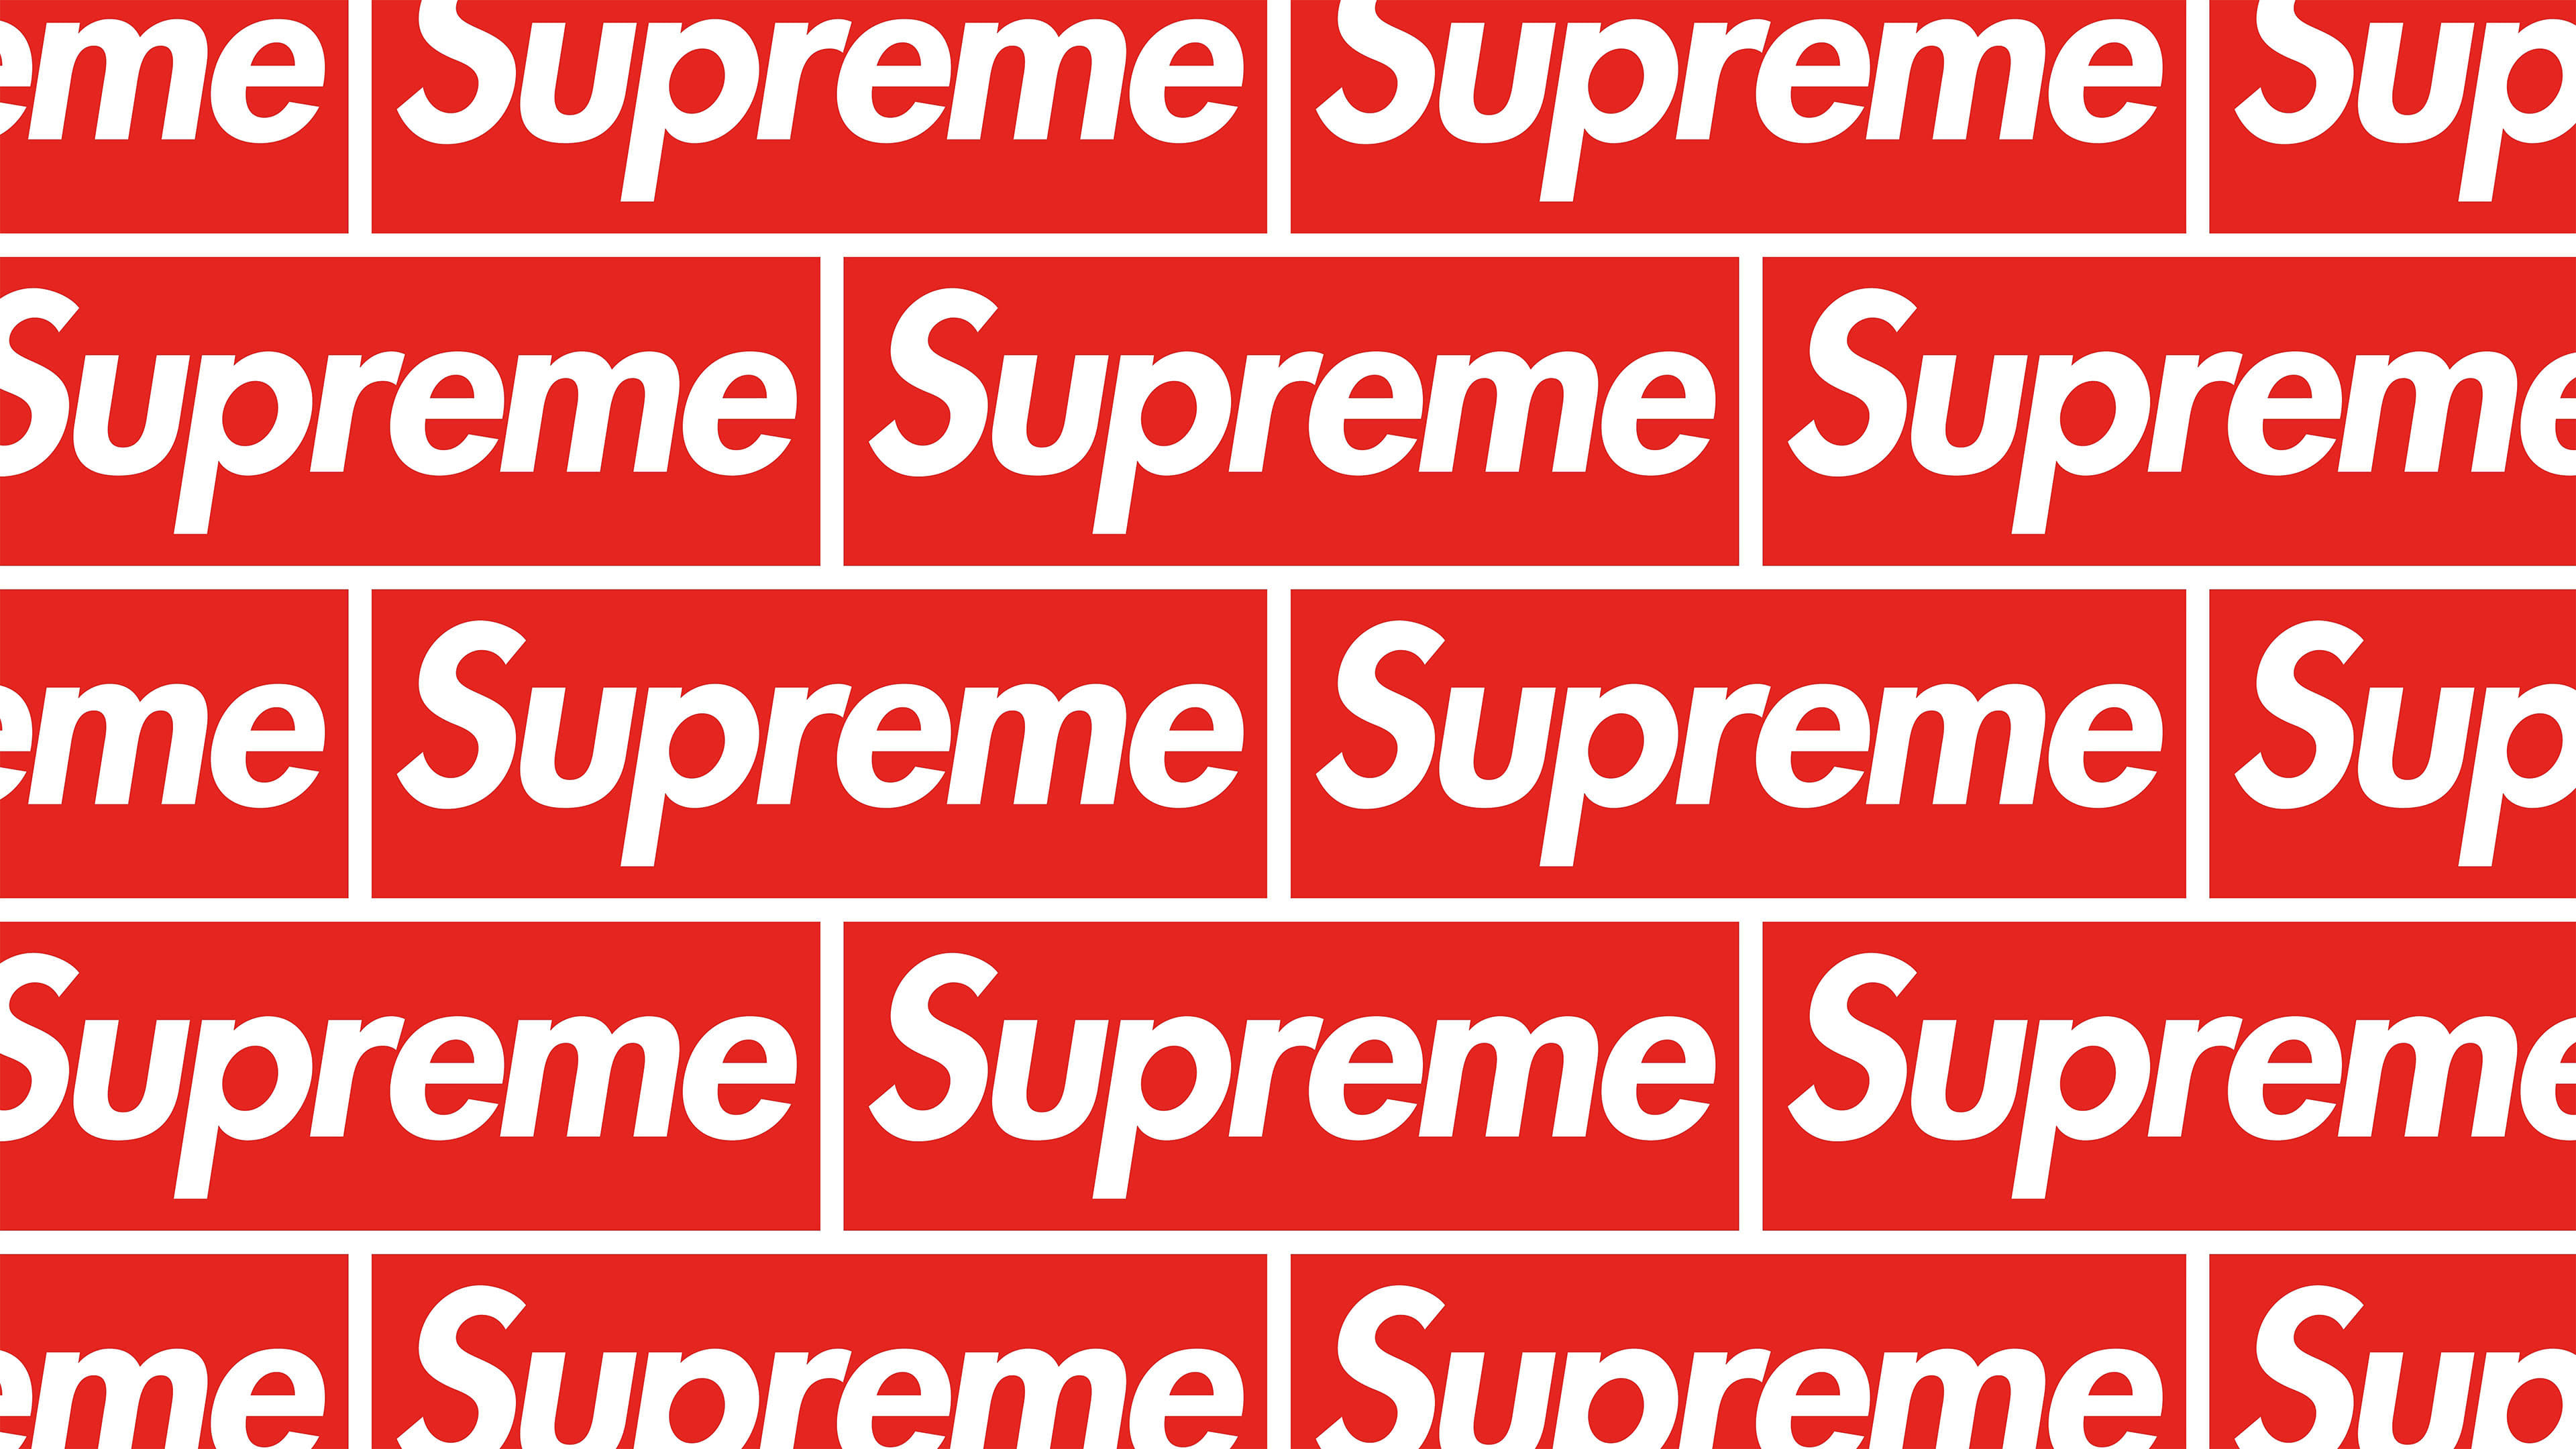  1001 ideas For a Cool and Fresh Supreme Wallpaper  Supreme wallpaper  Supreme iphone wallpaper Iphone wallpaper